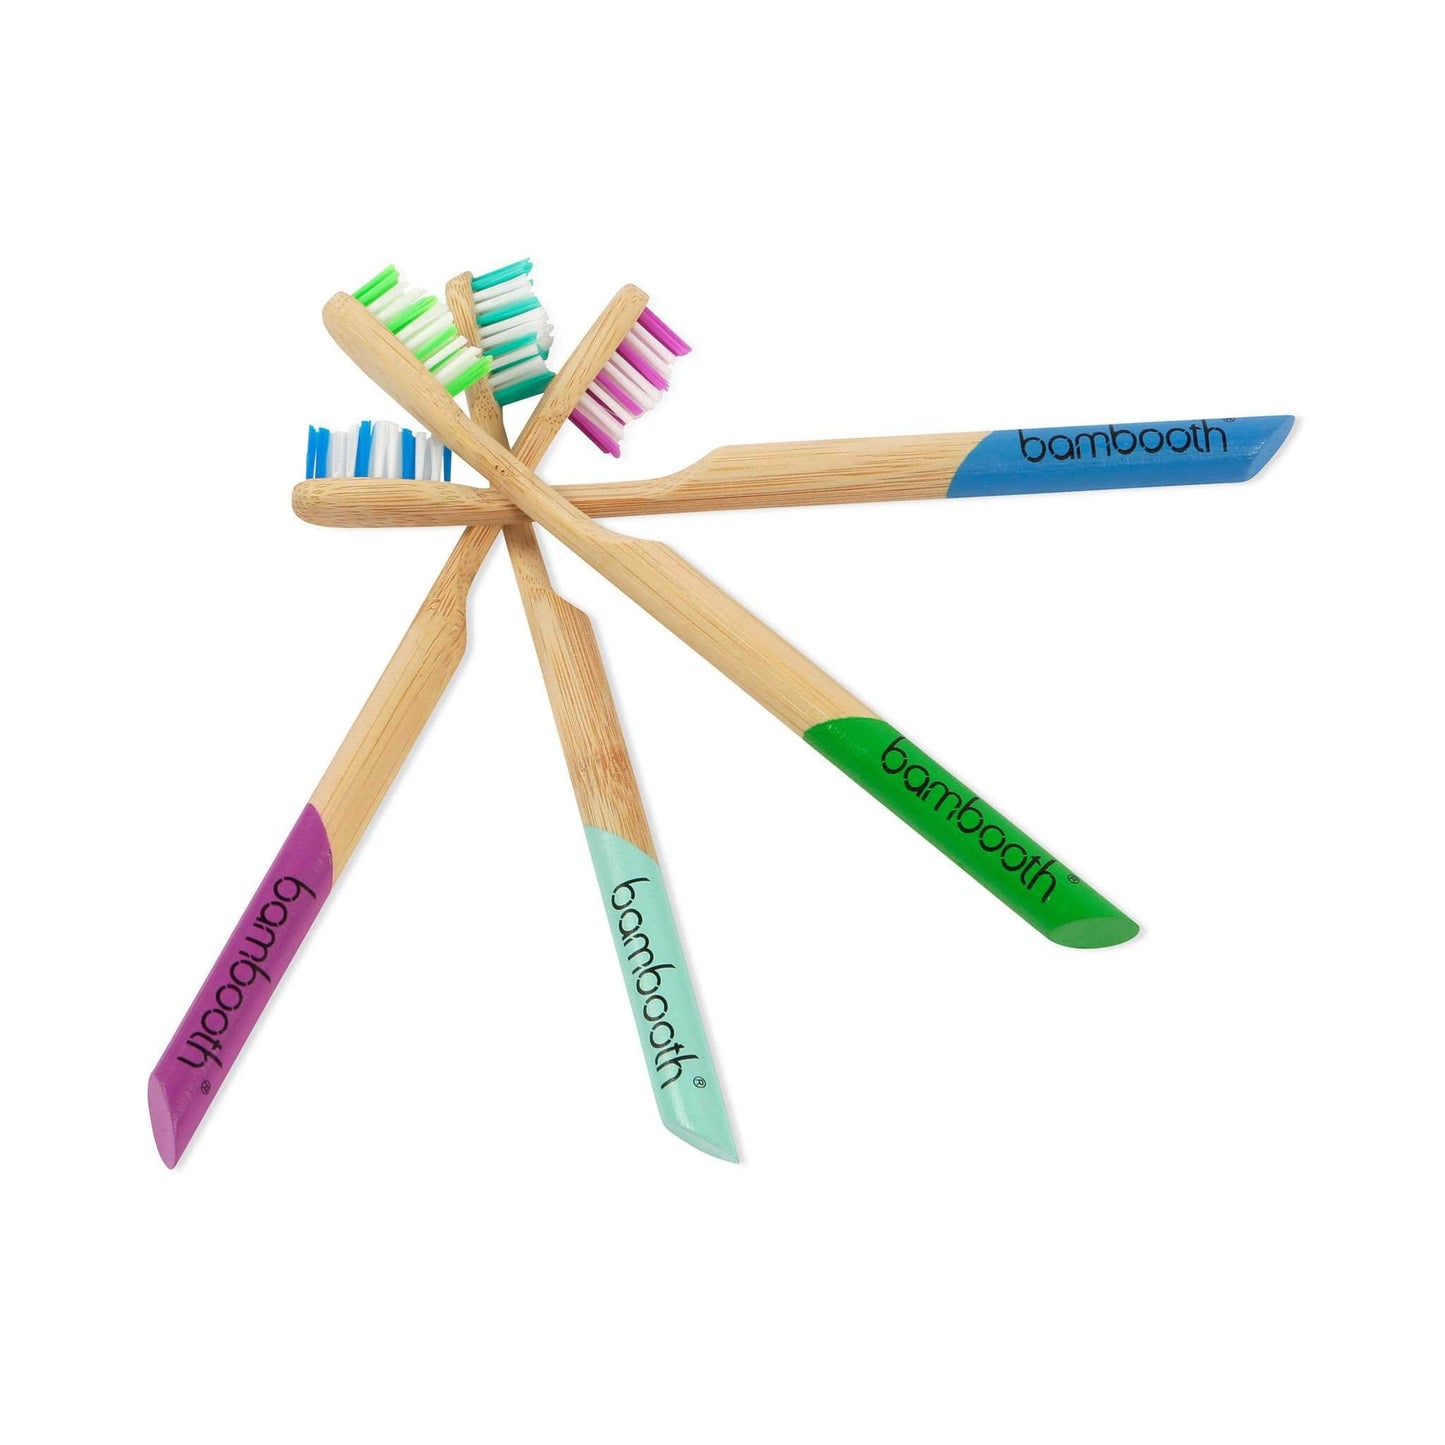 Bambooth Toothbrush Bamboo Toothbrush Soft - Coral Pink